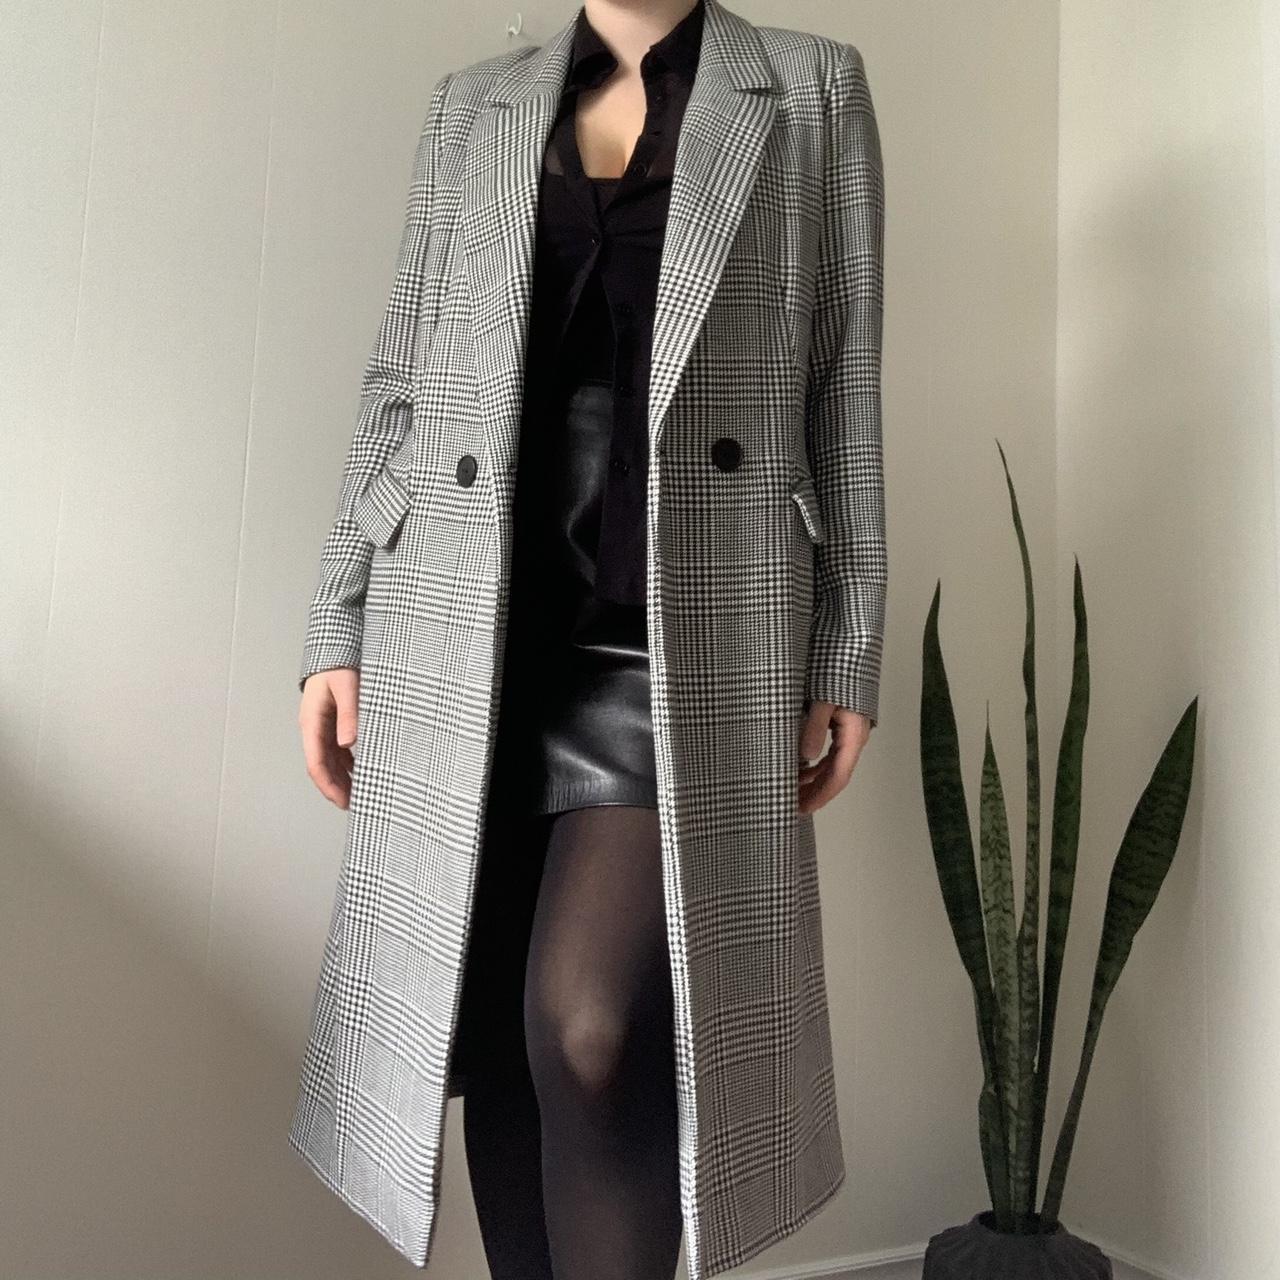 Women's Grey and White Jacket | Depop